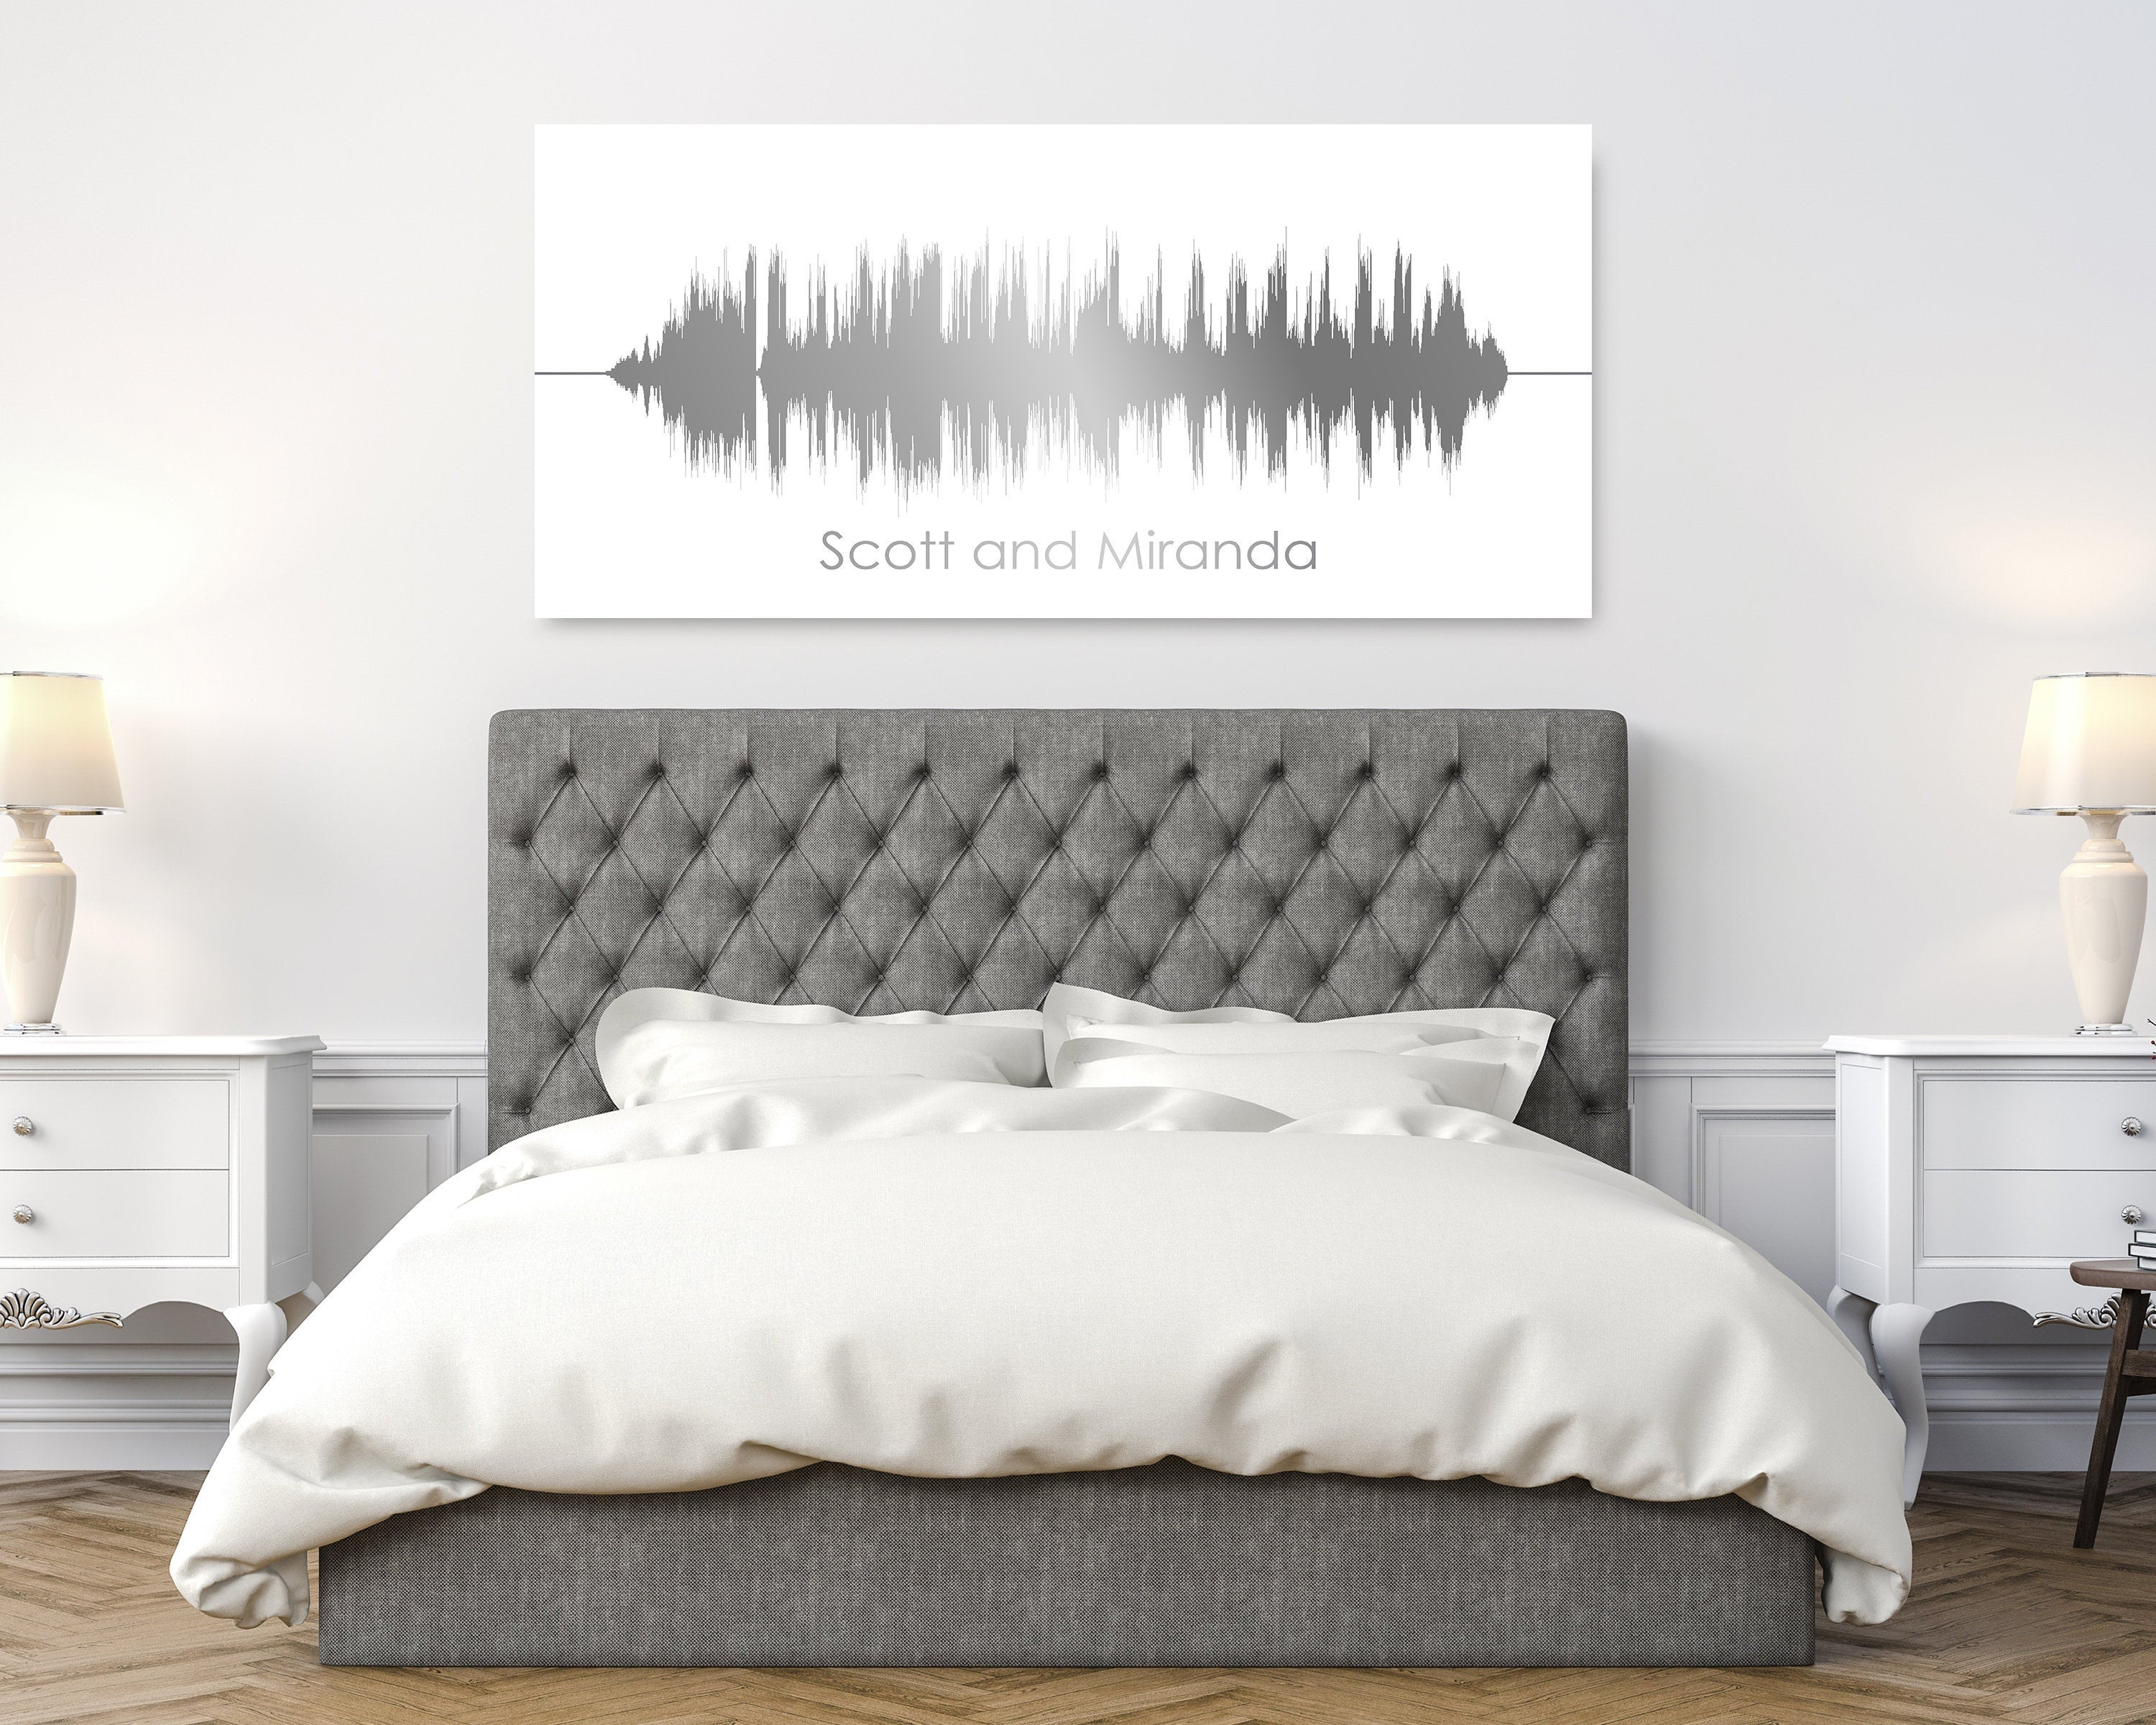 11th Anniversary Gift Personalized Sound Wave Canvas